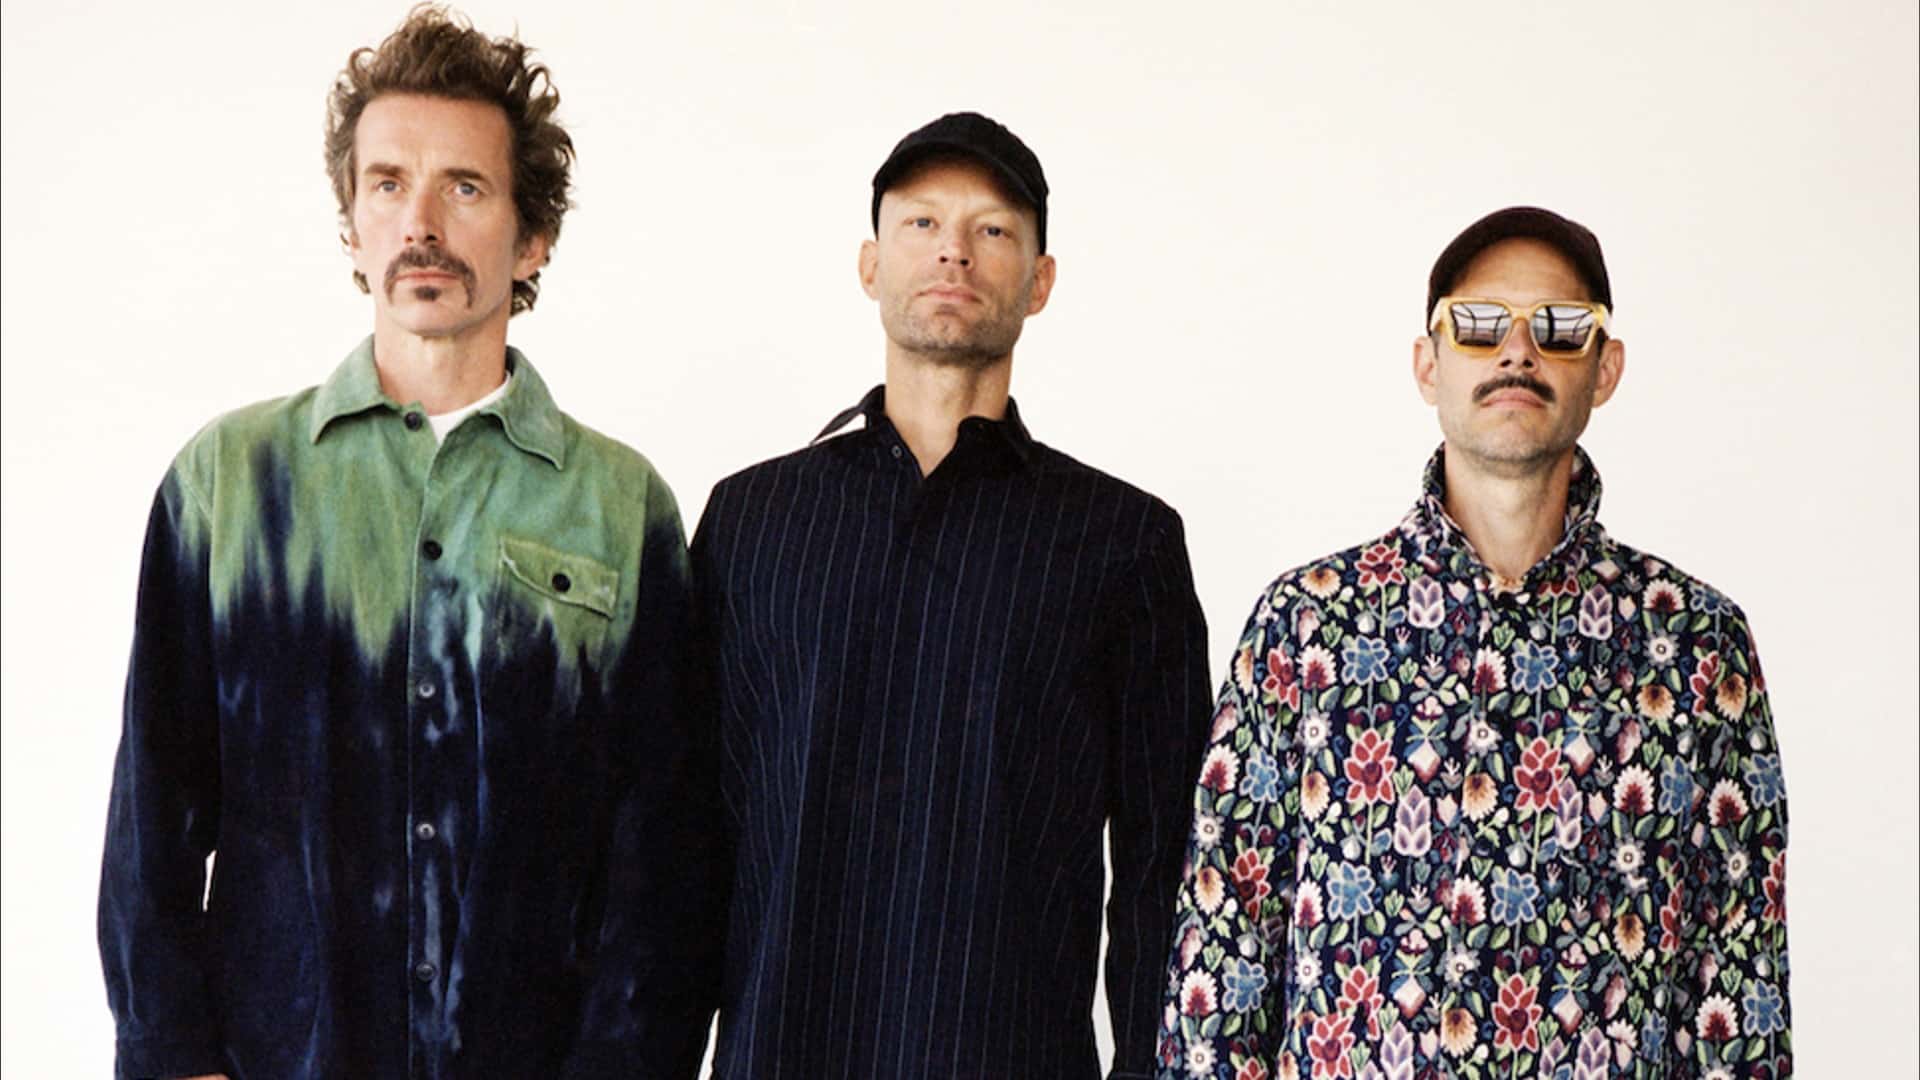 Adriatique and WhoMadeWho join forces to create a blissful ‘Miracle’: Listen